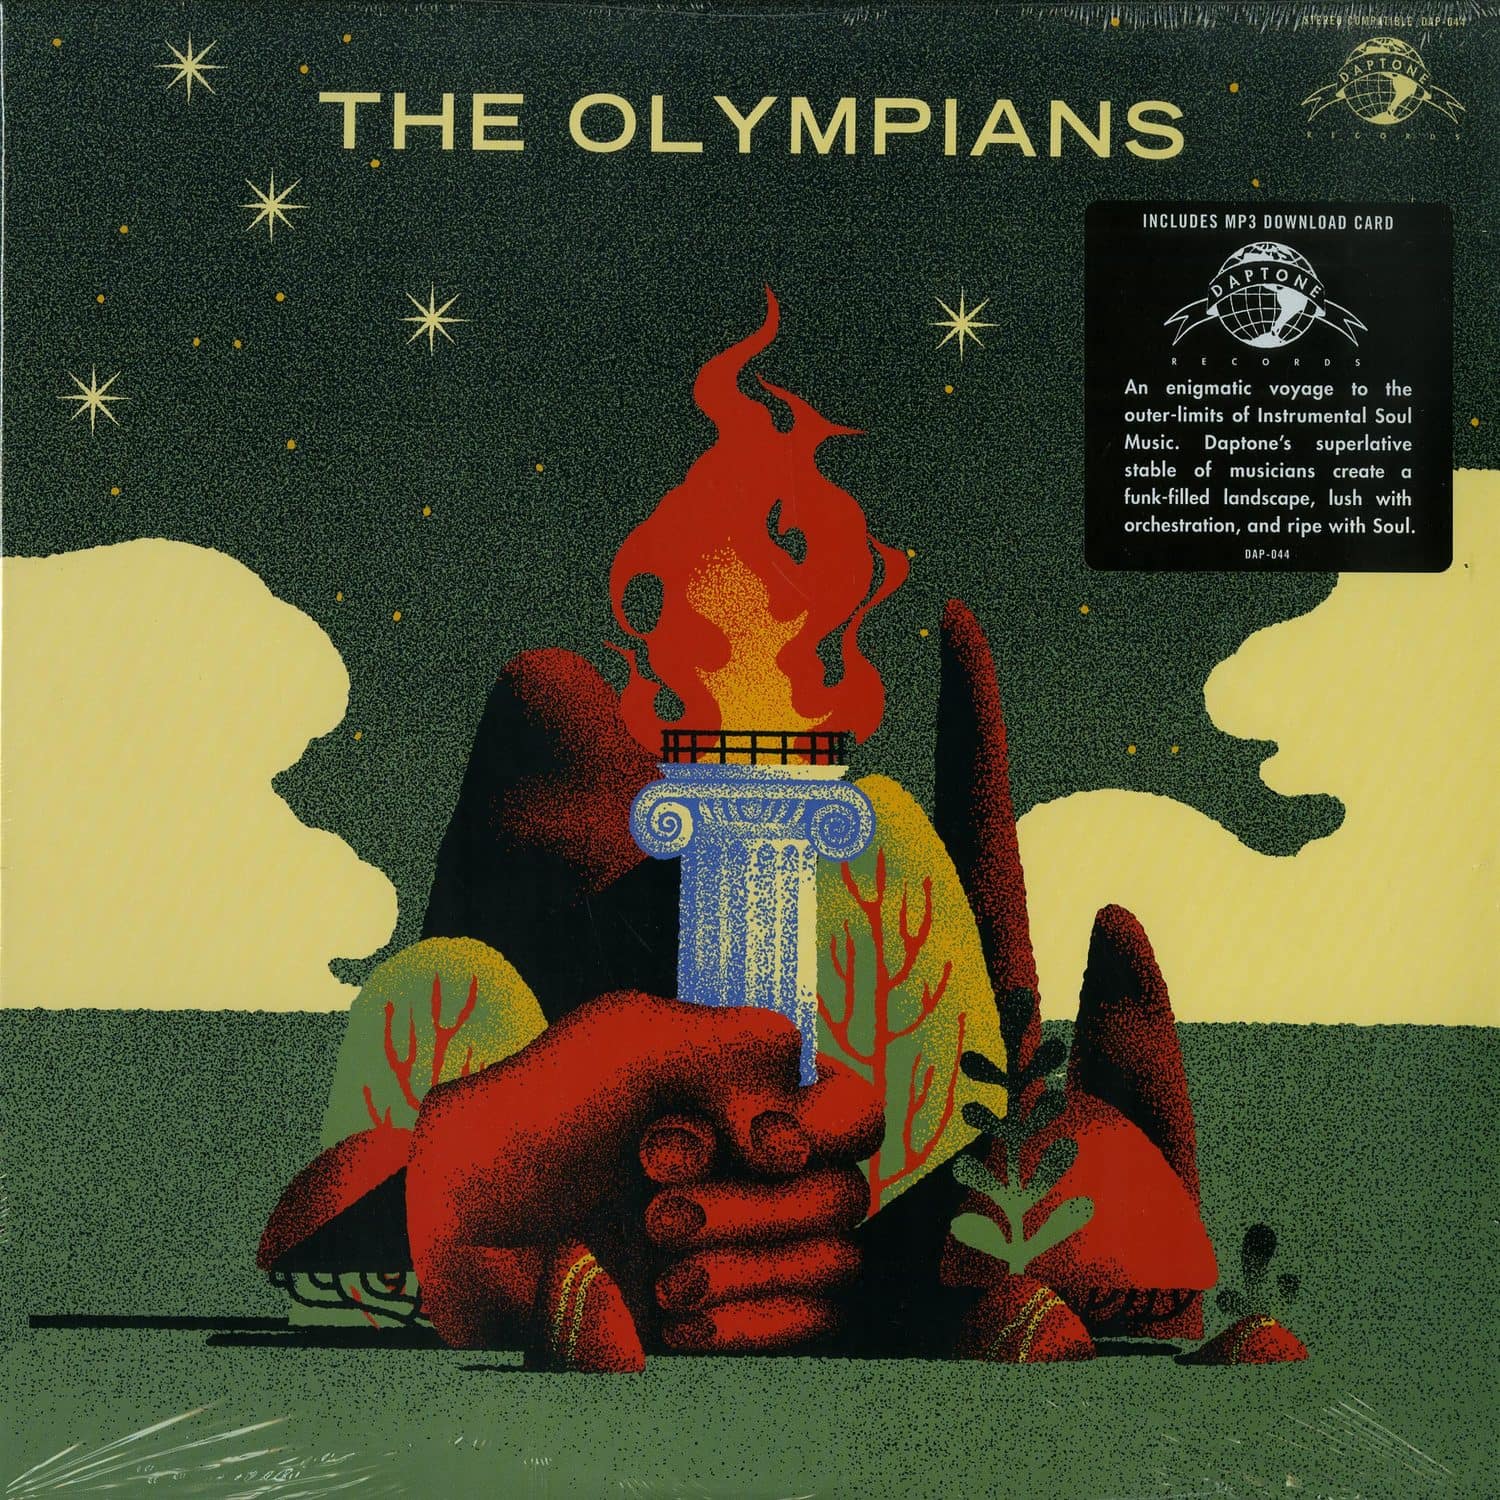 The Olympians - THE OLYMPIANS 